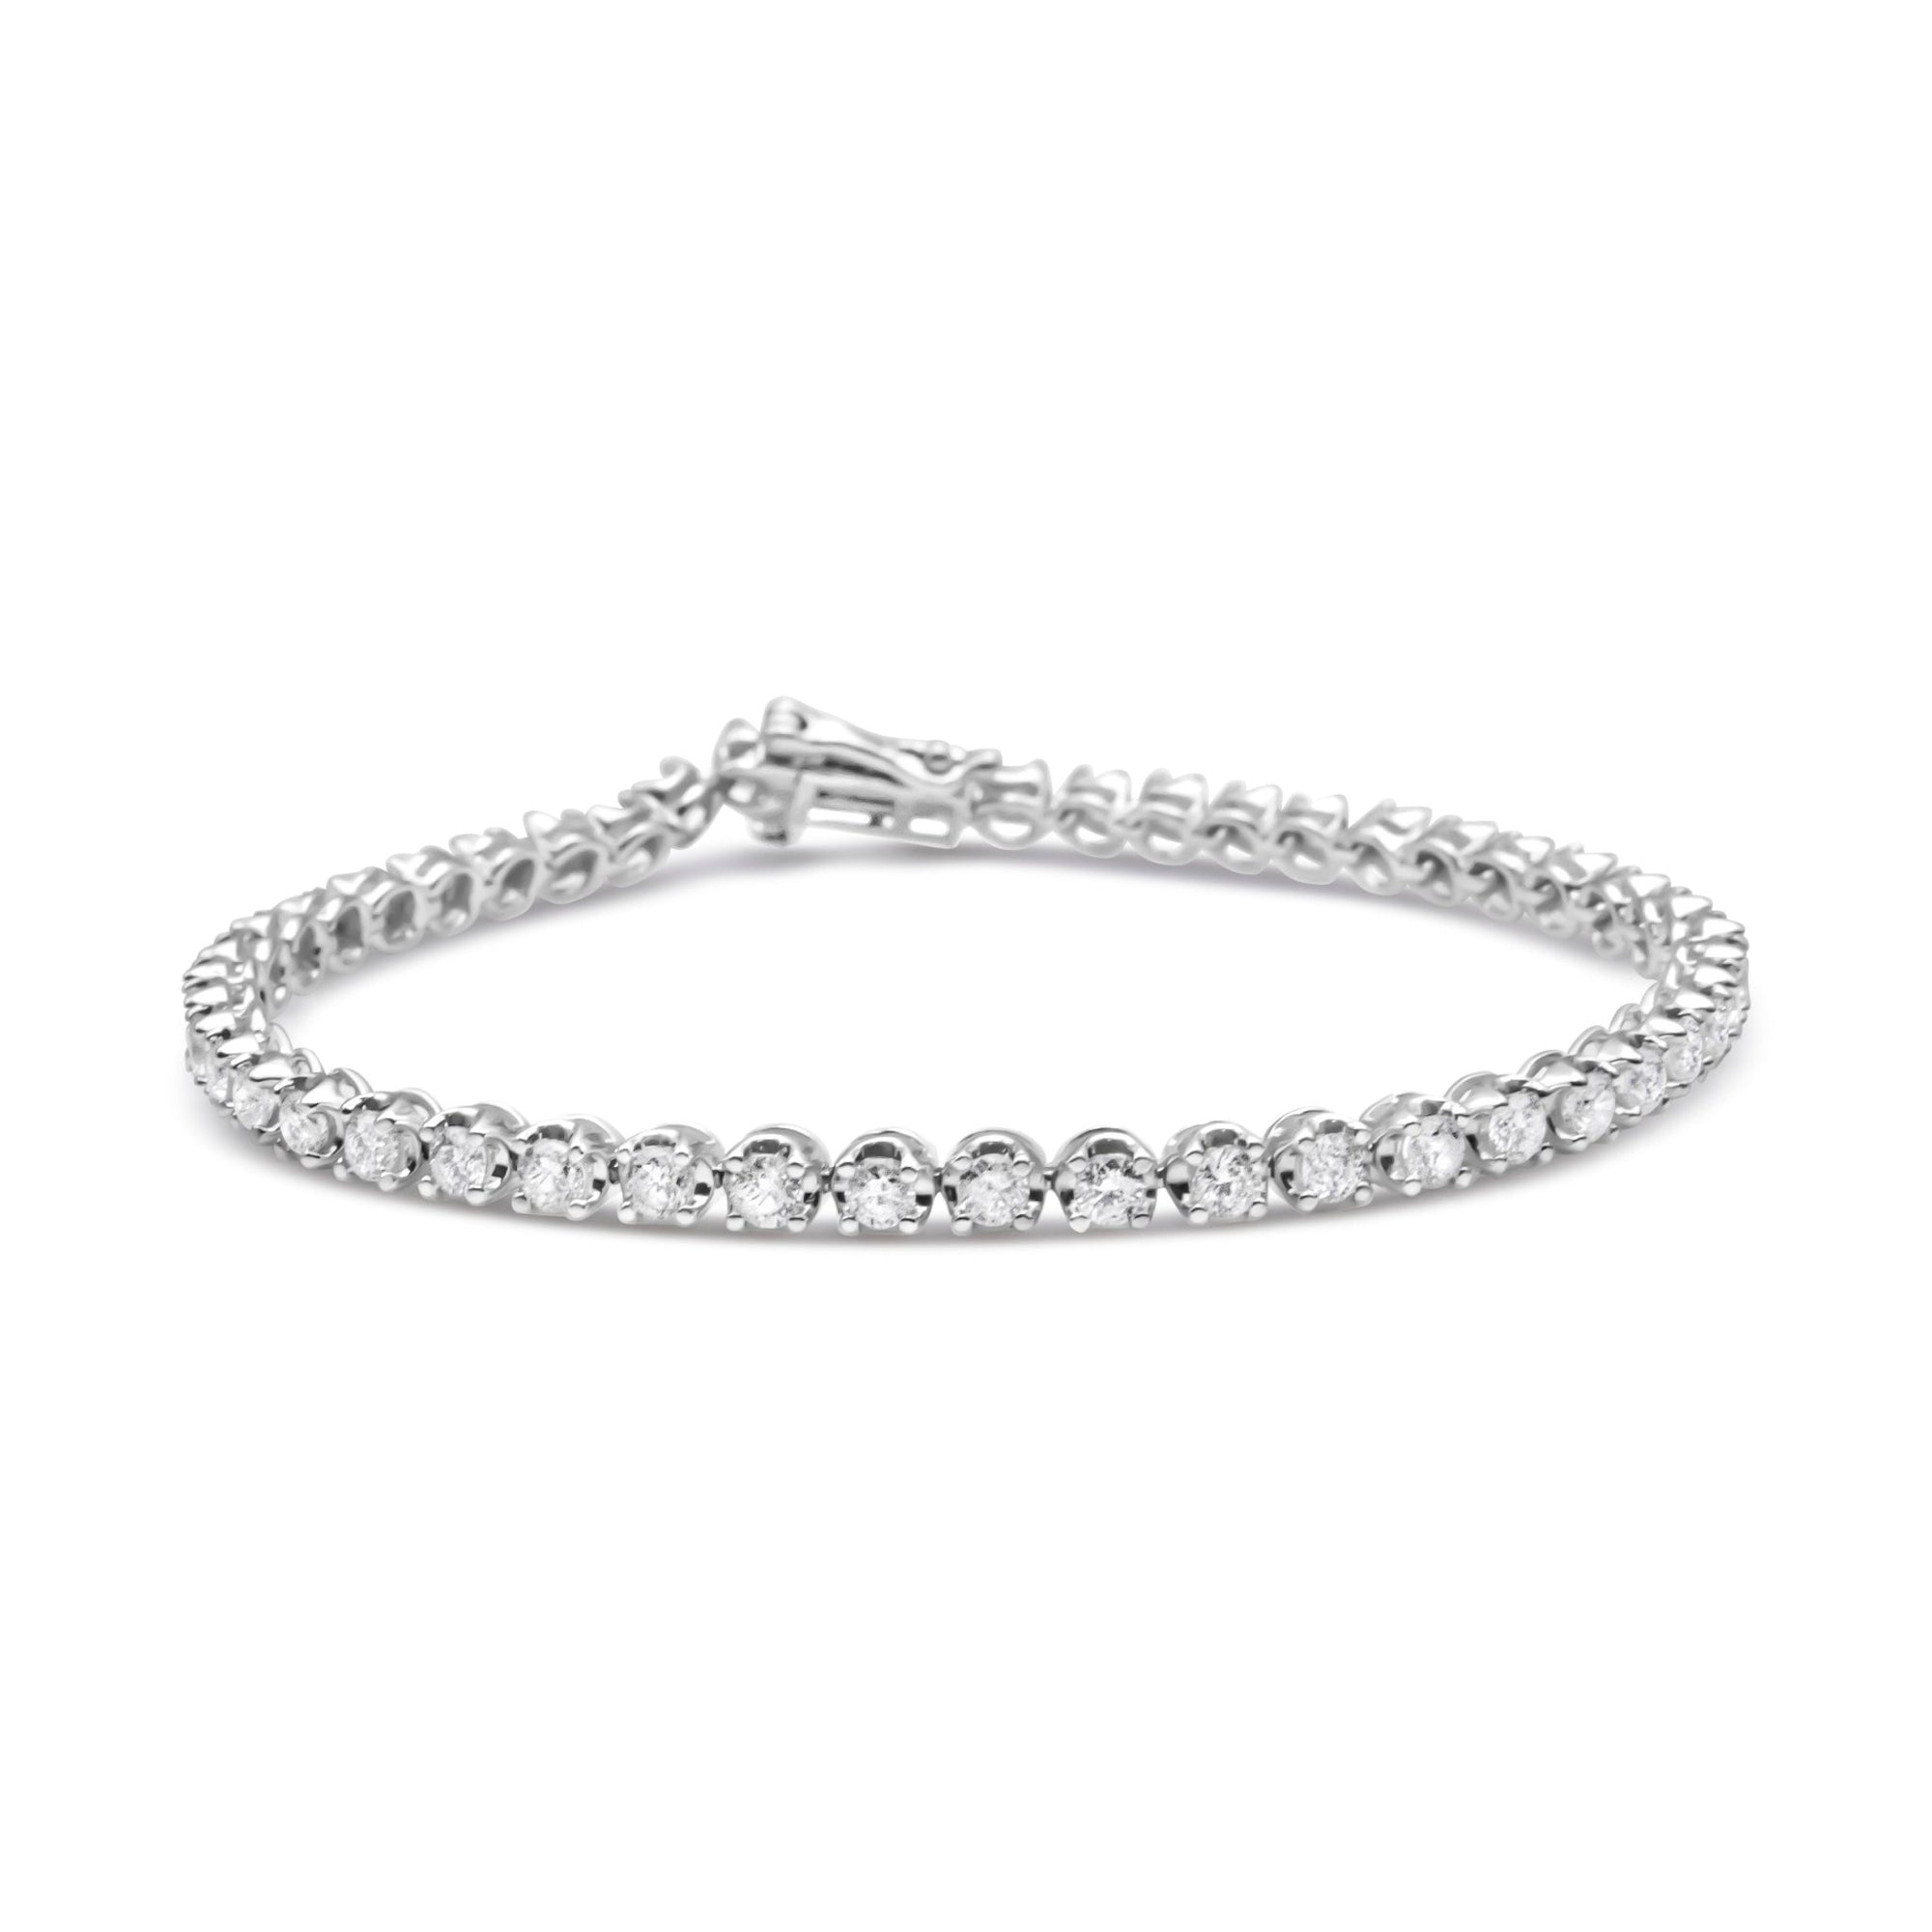 14K White Gold 5.0 Cttw Diamond" Classic Tennis Bracelet for Women (H-I Color, SI1-SI2 Clarity) - 7" Inches - LinkagejewelrydesignLinkagejewelrydesign